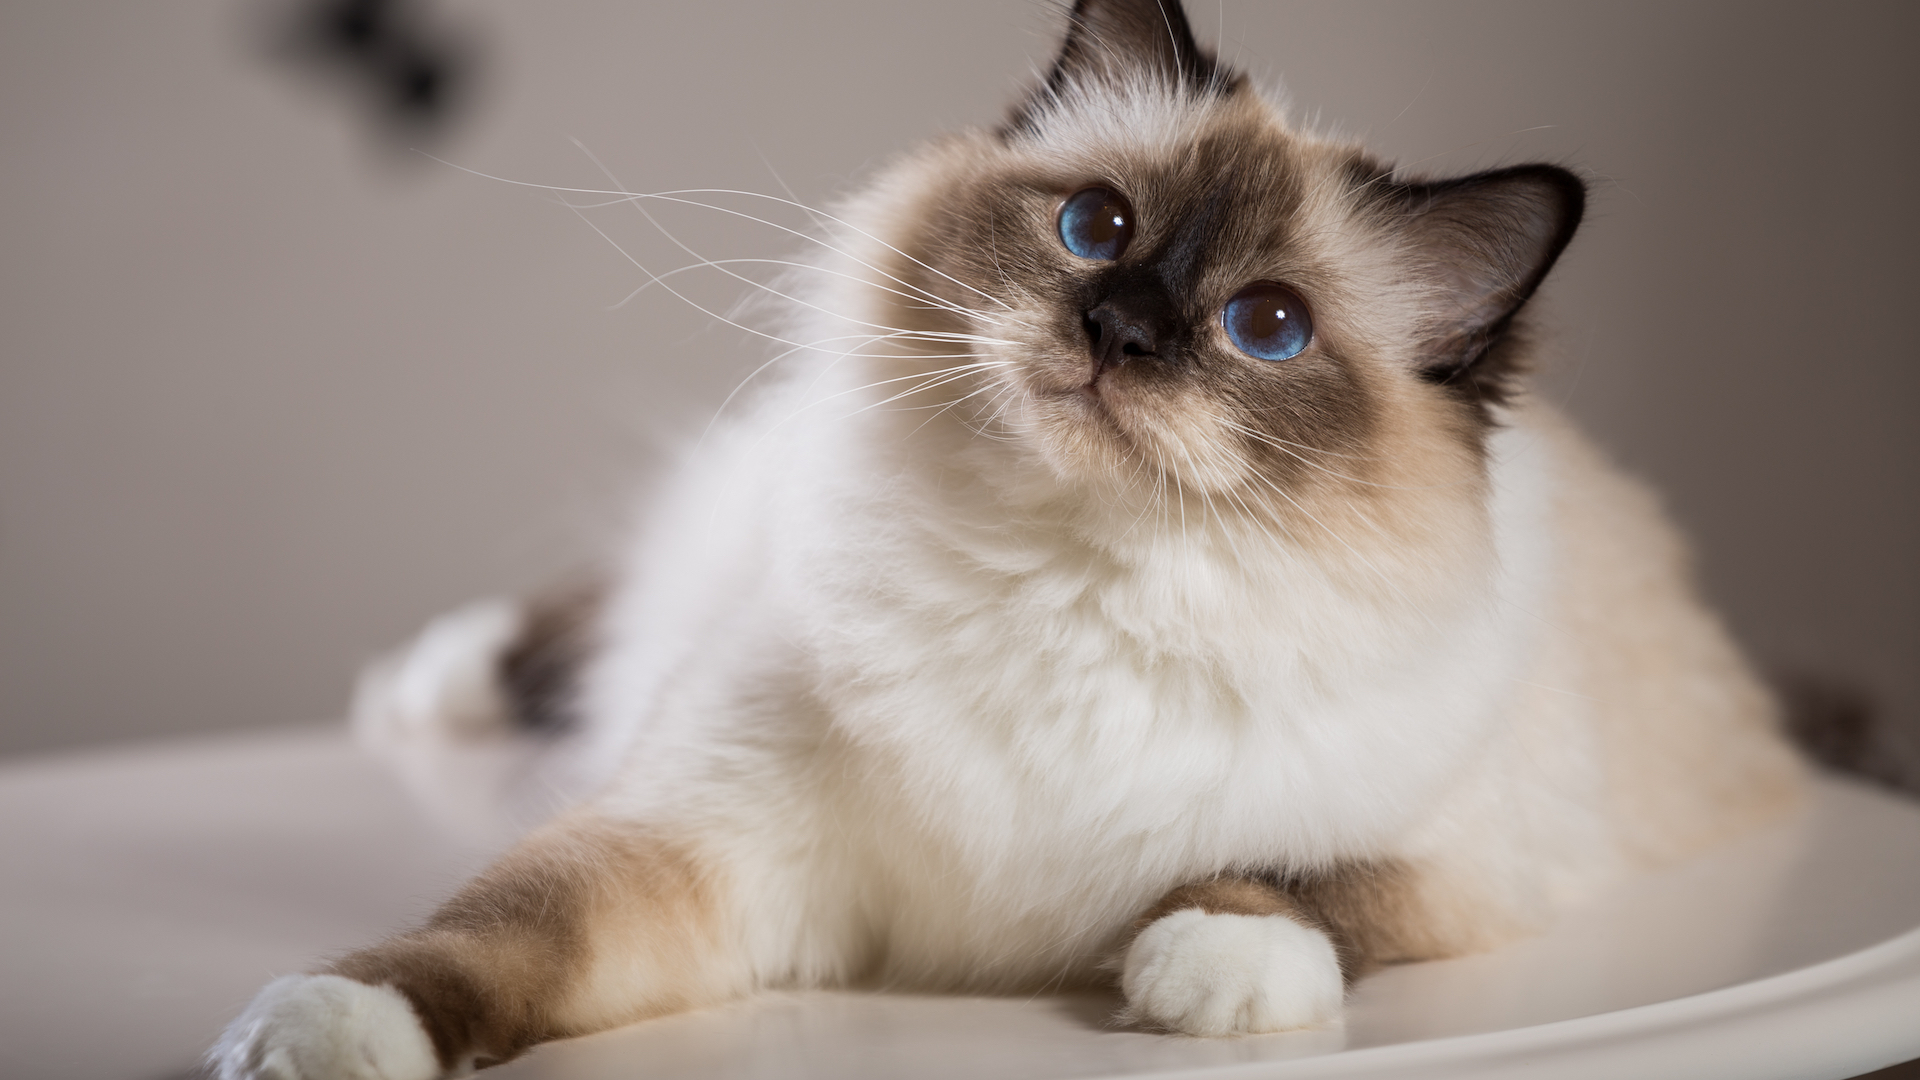 Massive study of 8,000 cats reveals which breeds live longest